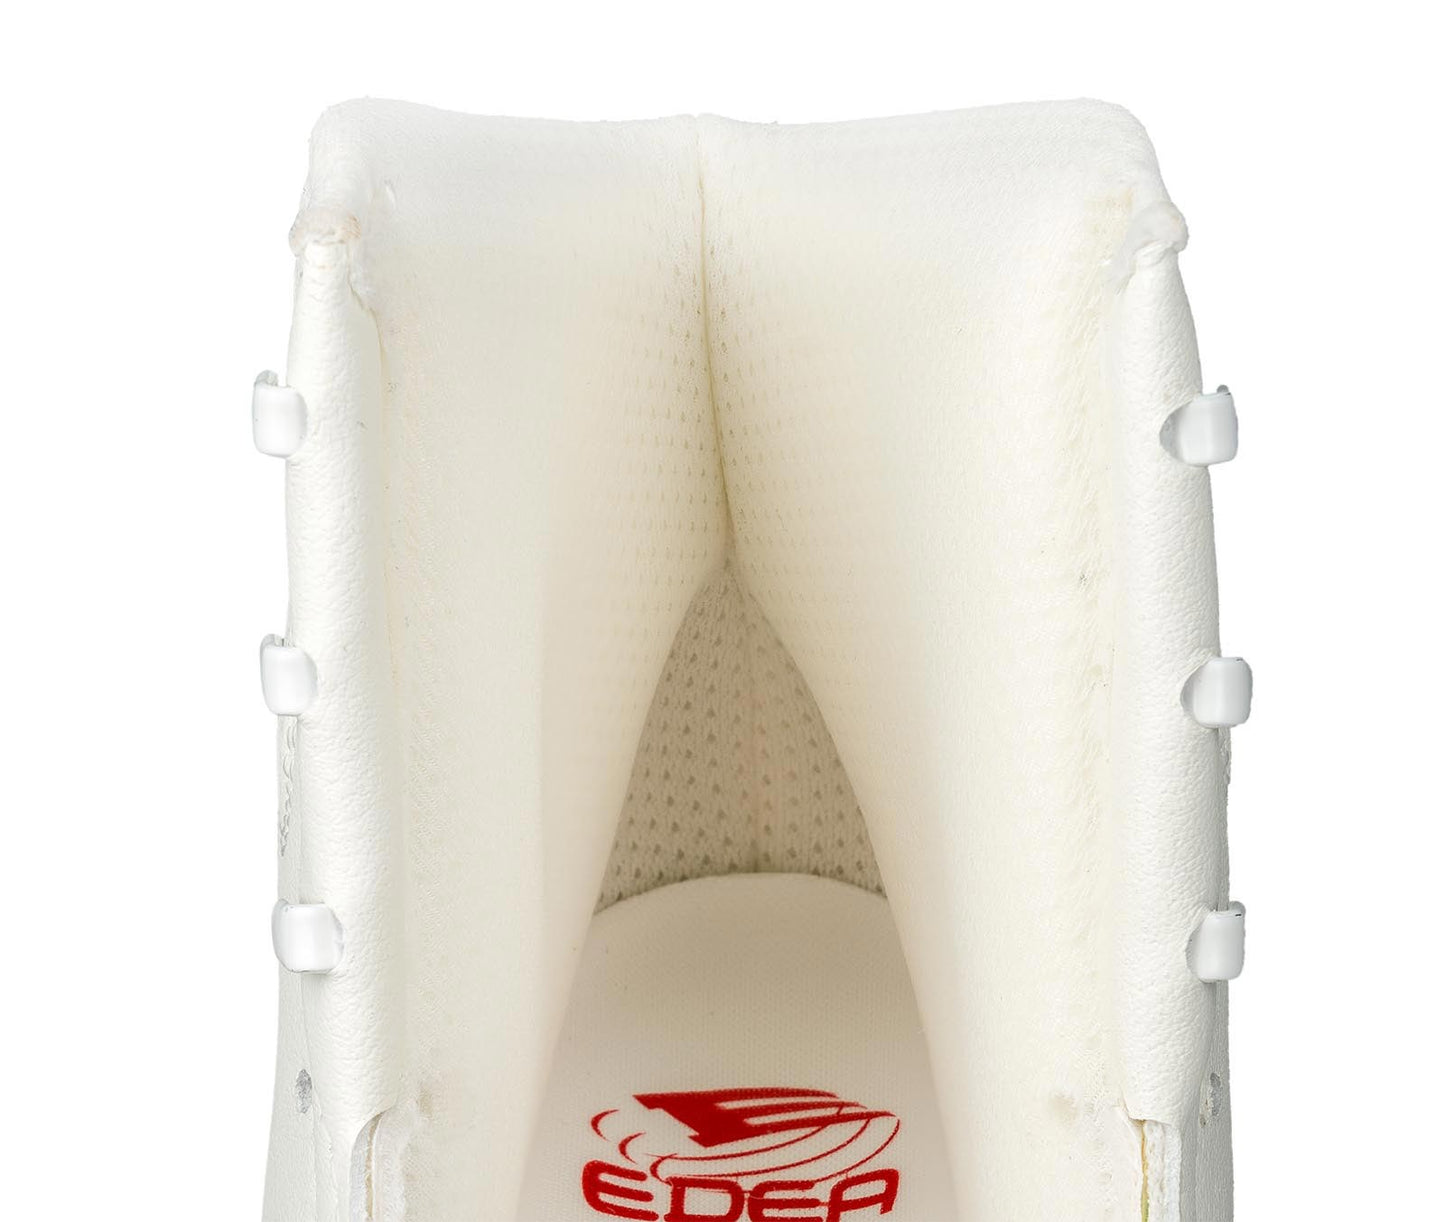 Edea Ice Fly Boots in White